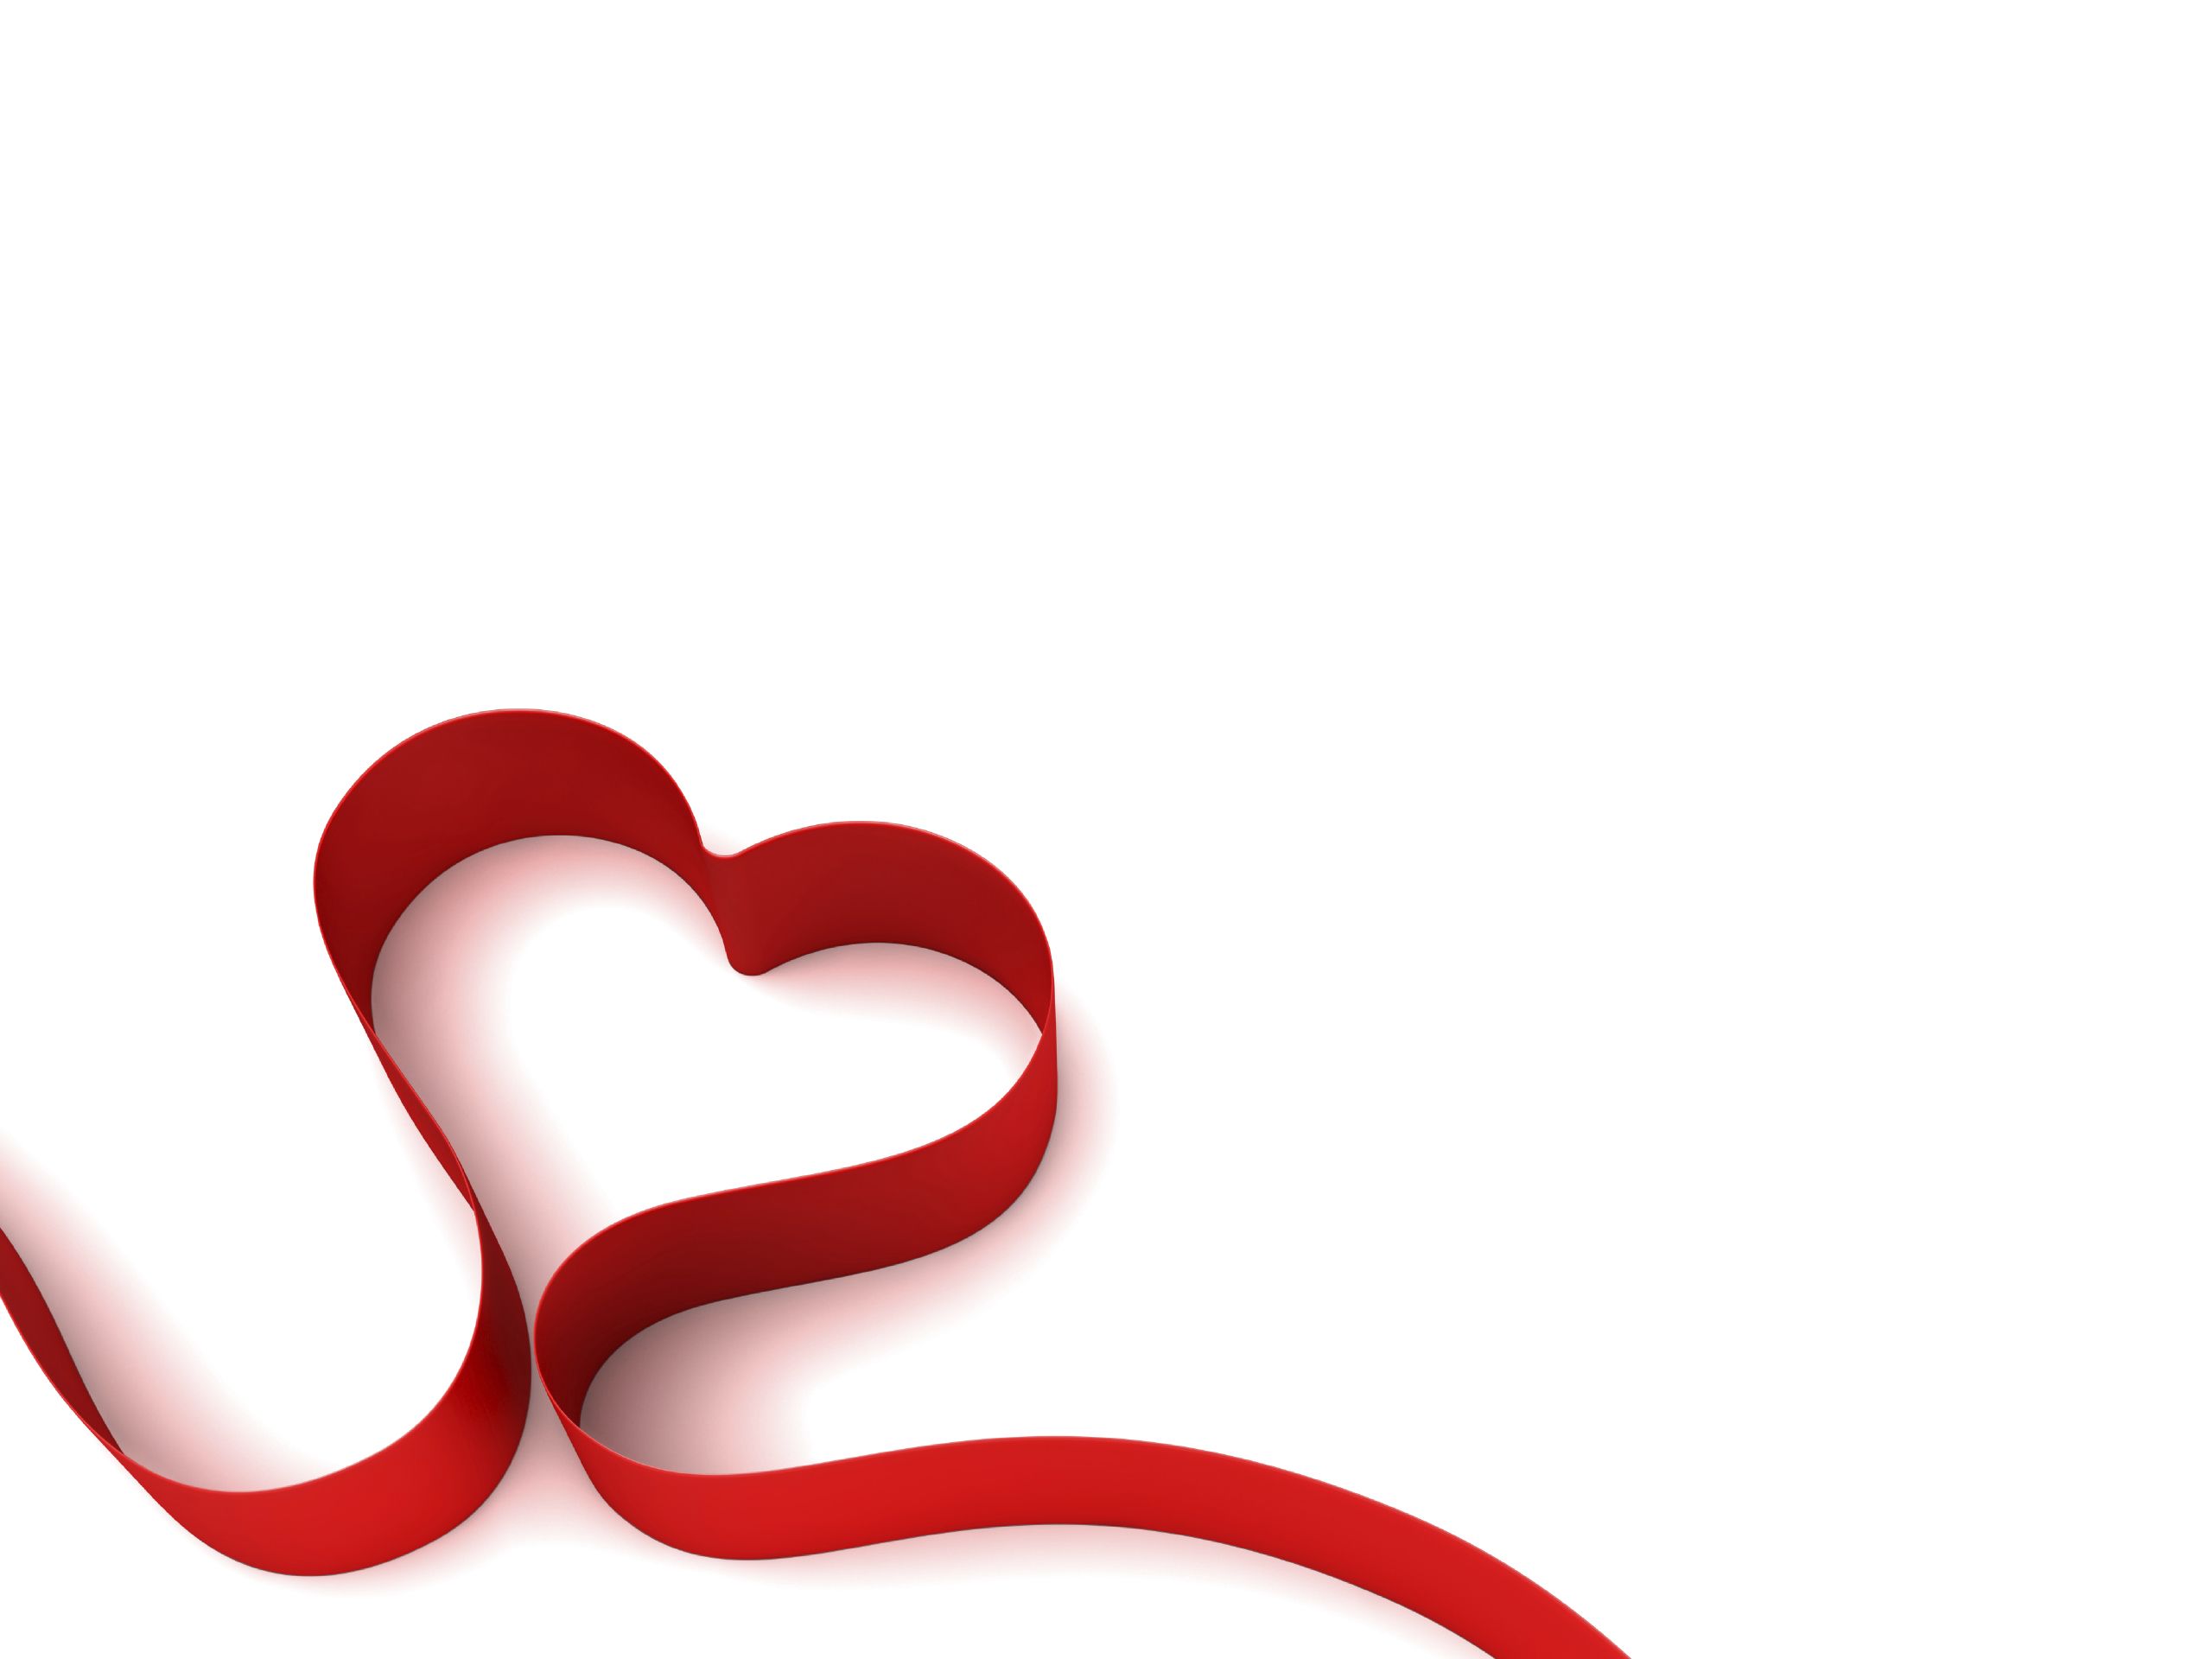 2560x1920 Simple Heart Background 17777 2560x1920px